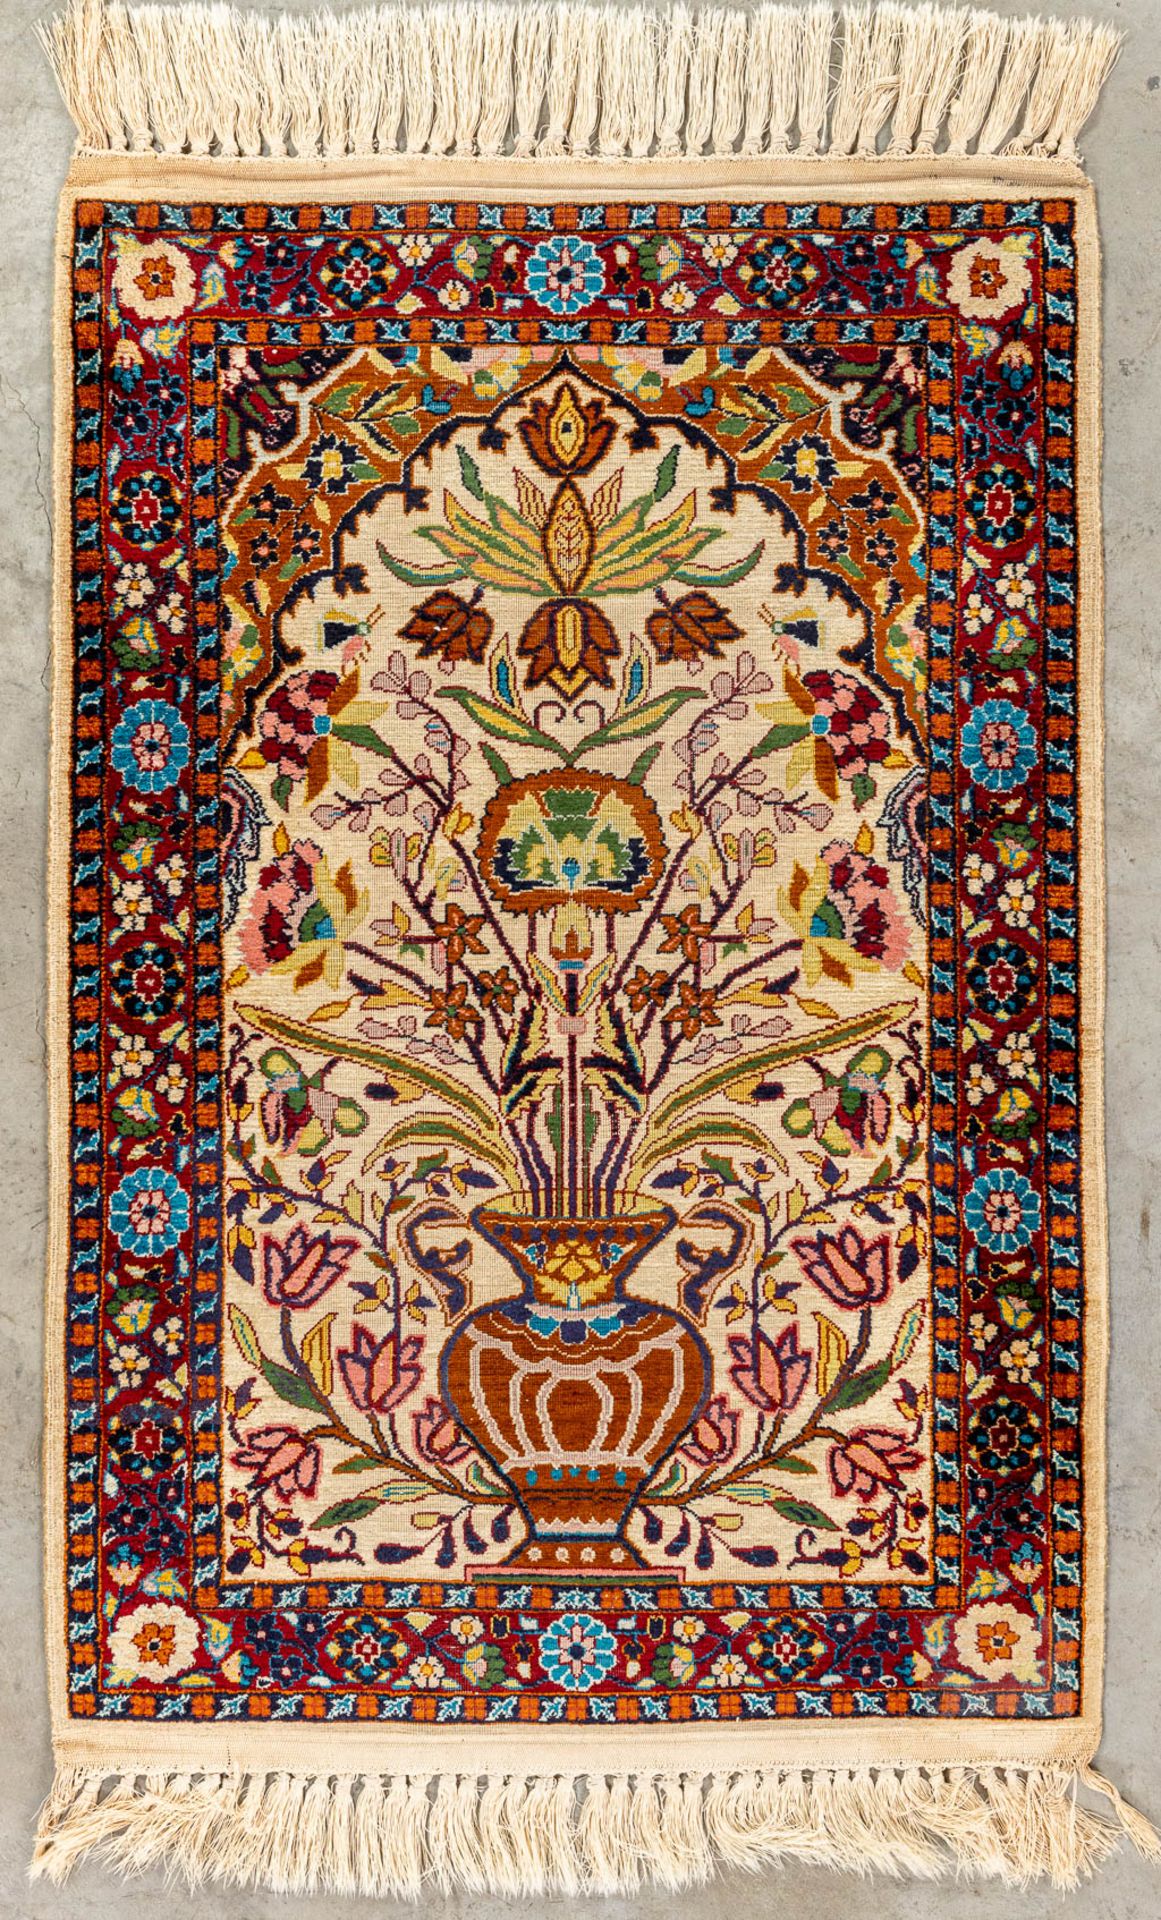 An oriental hand-made carpet made of Kashmir and wool. (90 x 61 cm) - Image 6 of 6